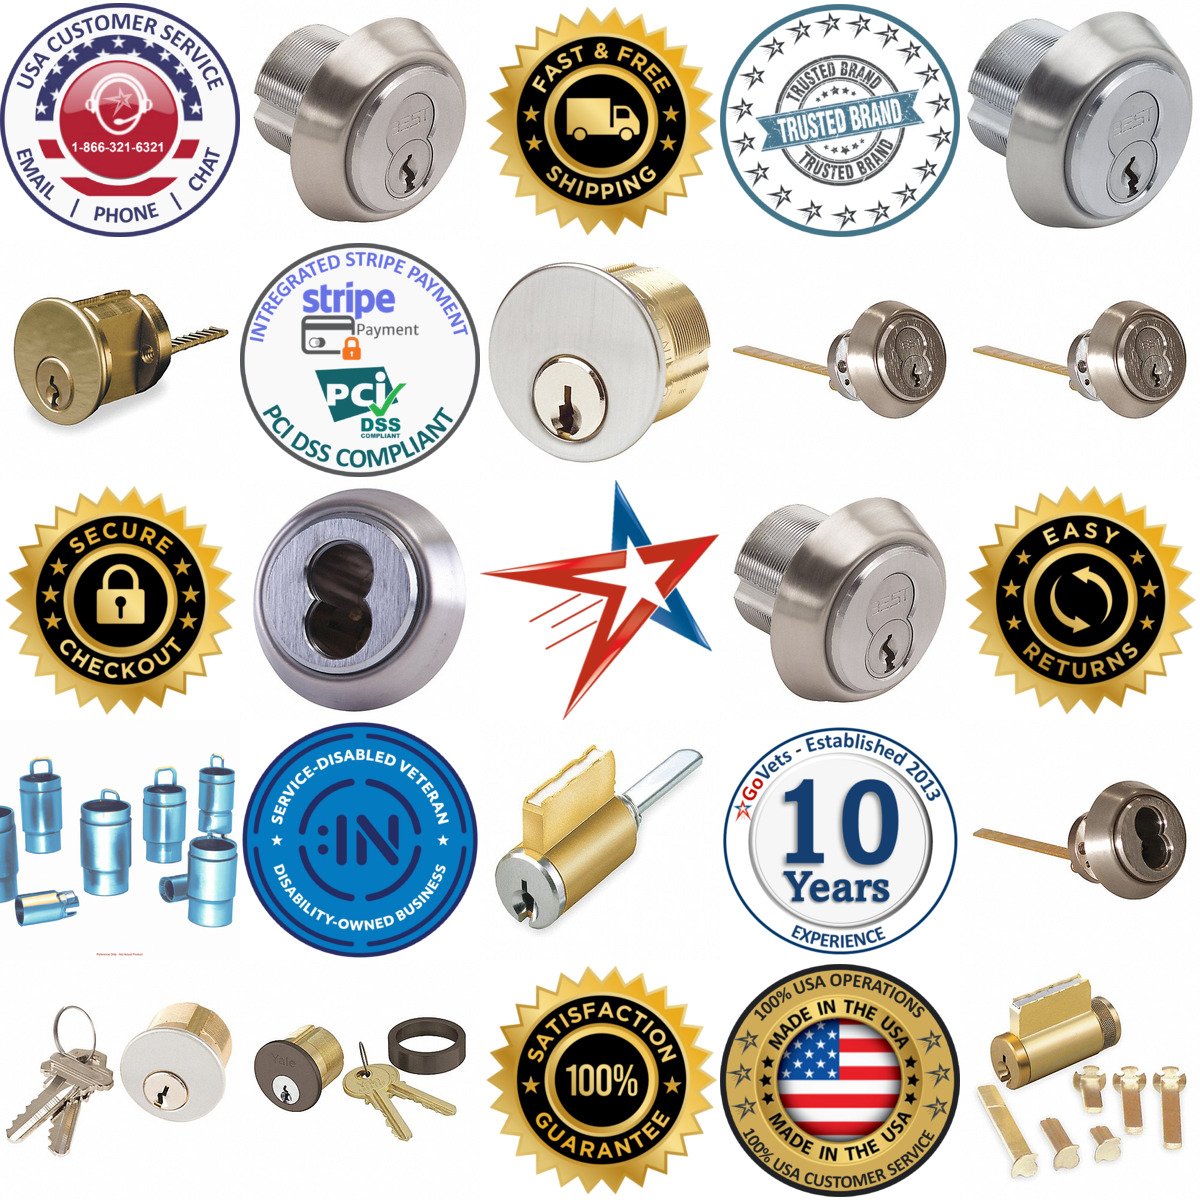 A selection of Lockset Cylinders products on GoVets